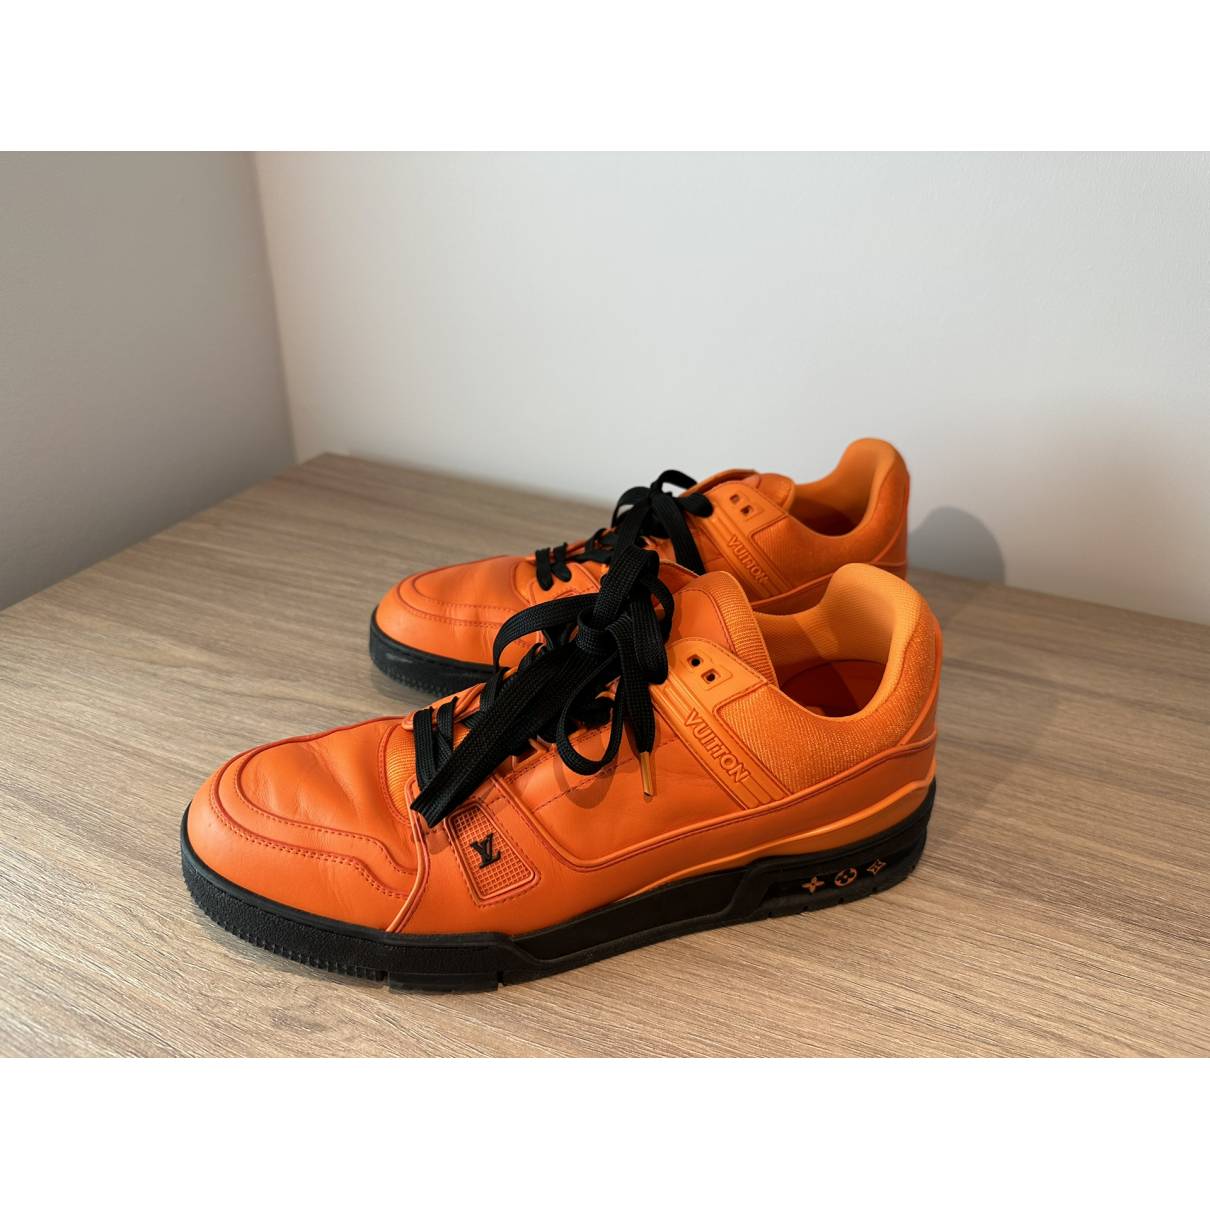 Lv trainer leather high trainers Louis Vuitton Orange size 10 UK